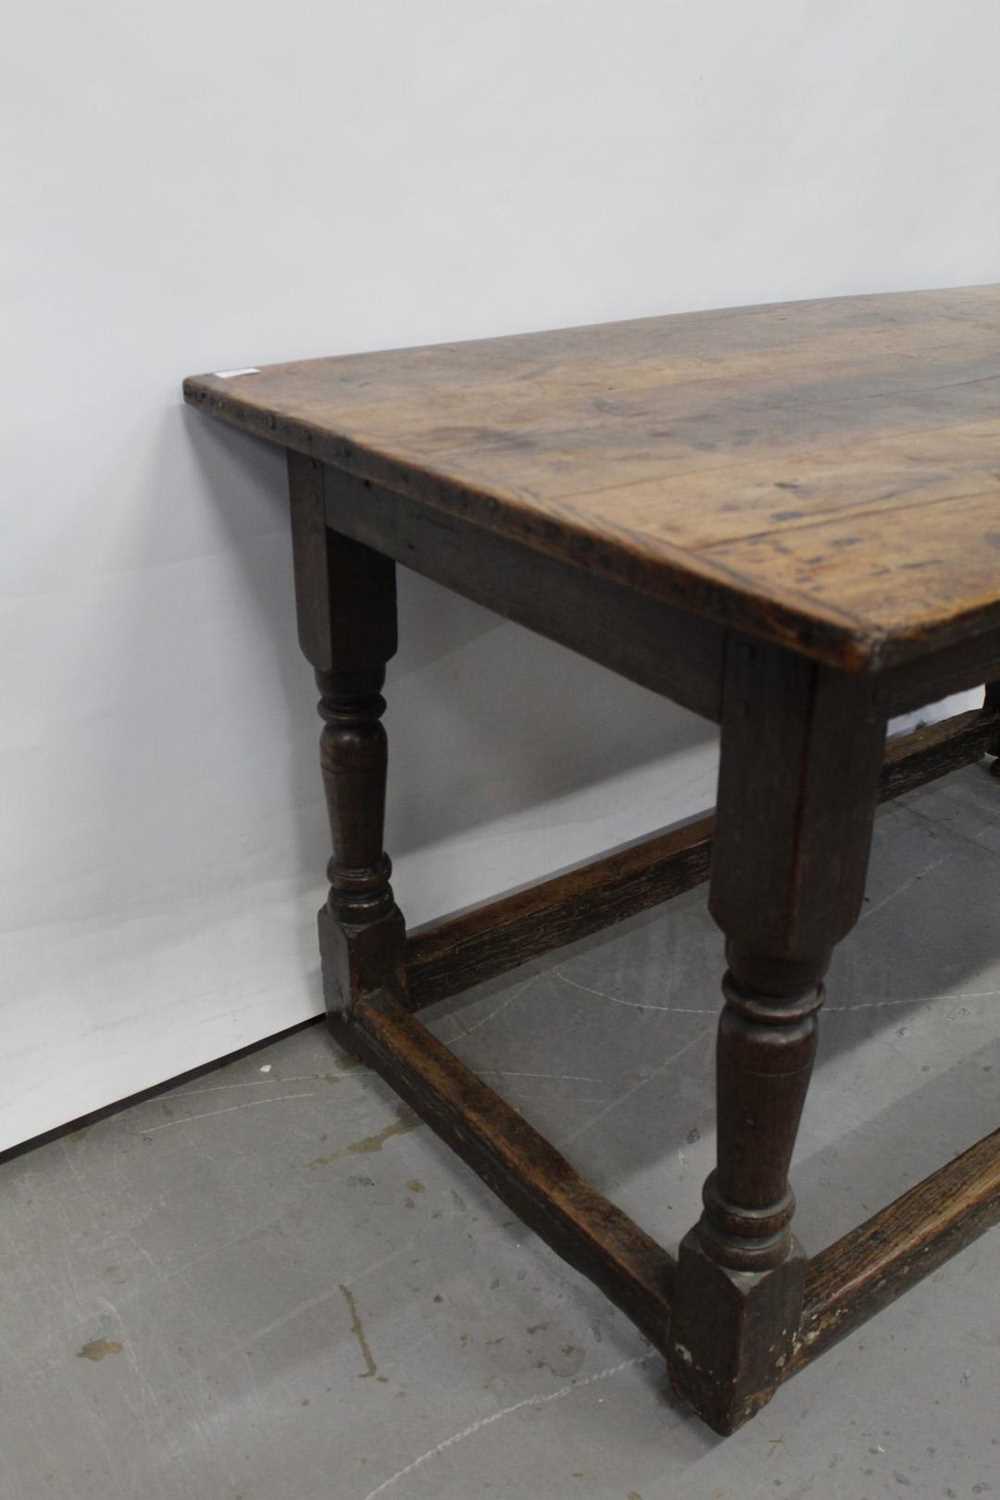 Rare early 18th century oak refectory table dated 1724 - Image 3 of 10